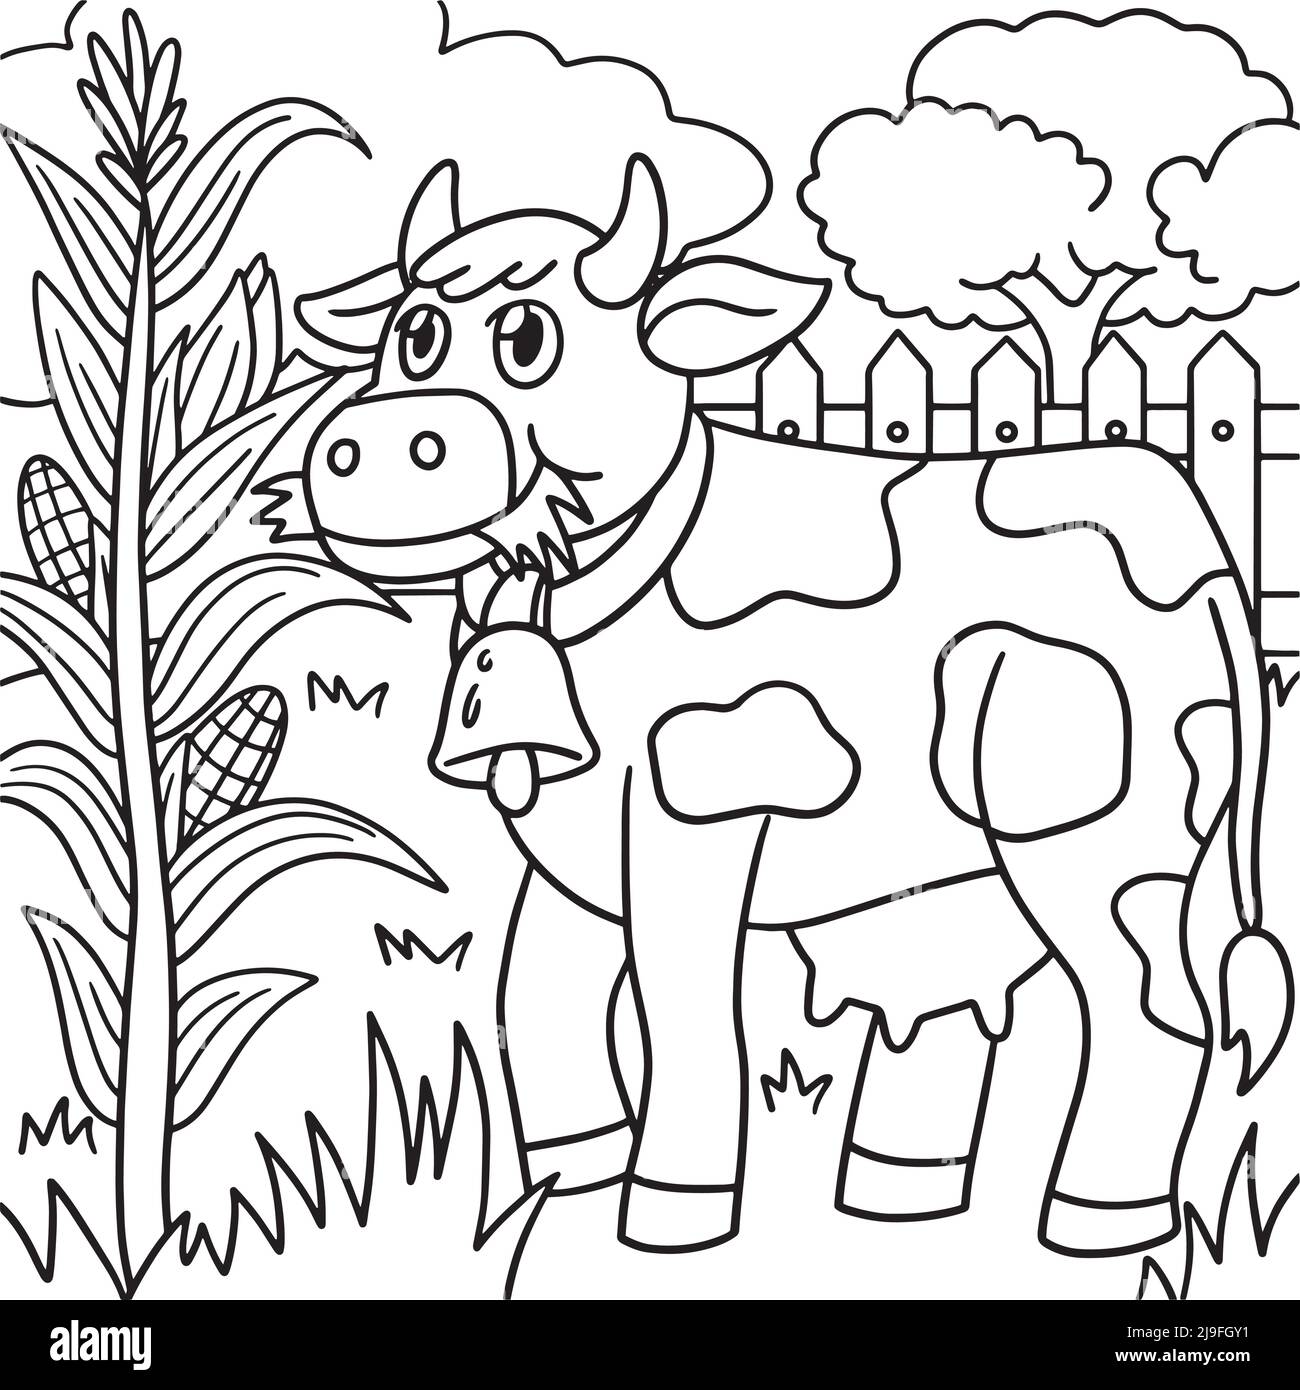 Cow Coloring Page for Kids Stock Vector Image & Art - Alamy